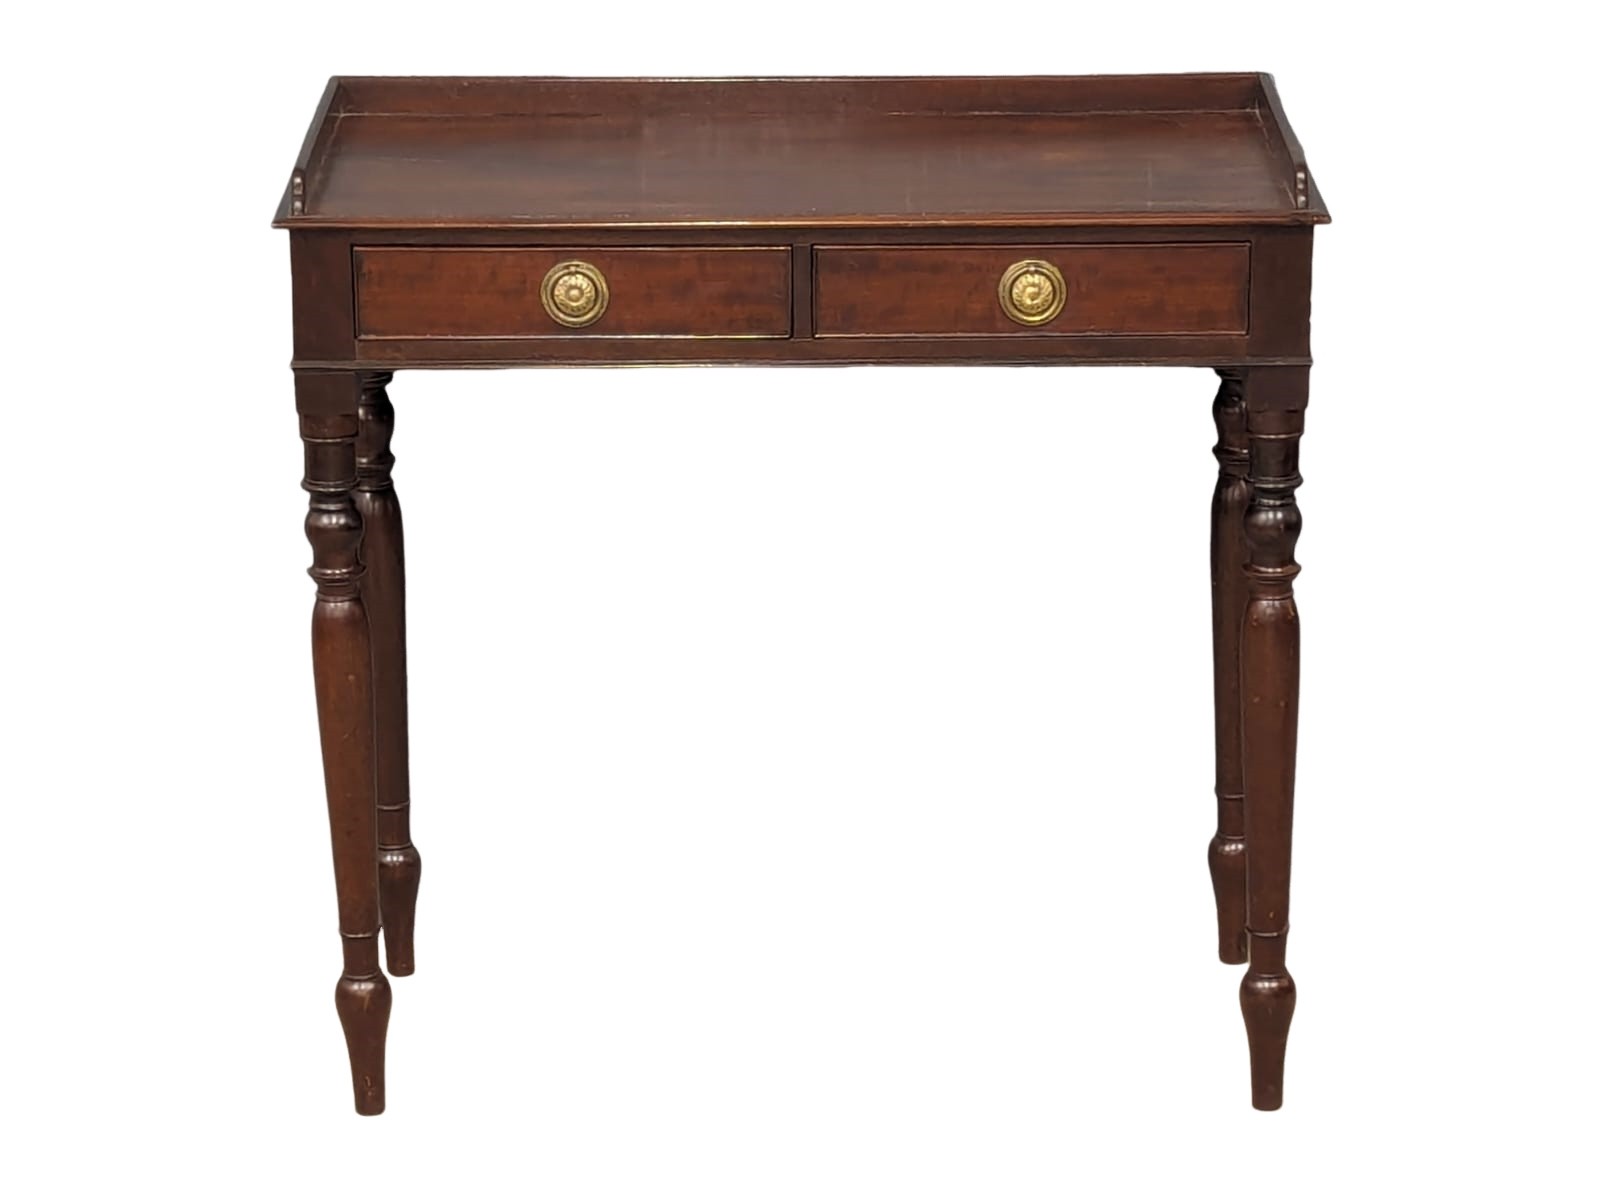 A Victorian mahogany gallery back hall table with 2 drawers with turned tapering legs. 79.5x38x78cm - Image 2 of 6